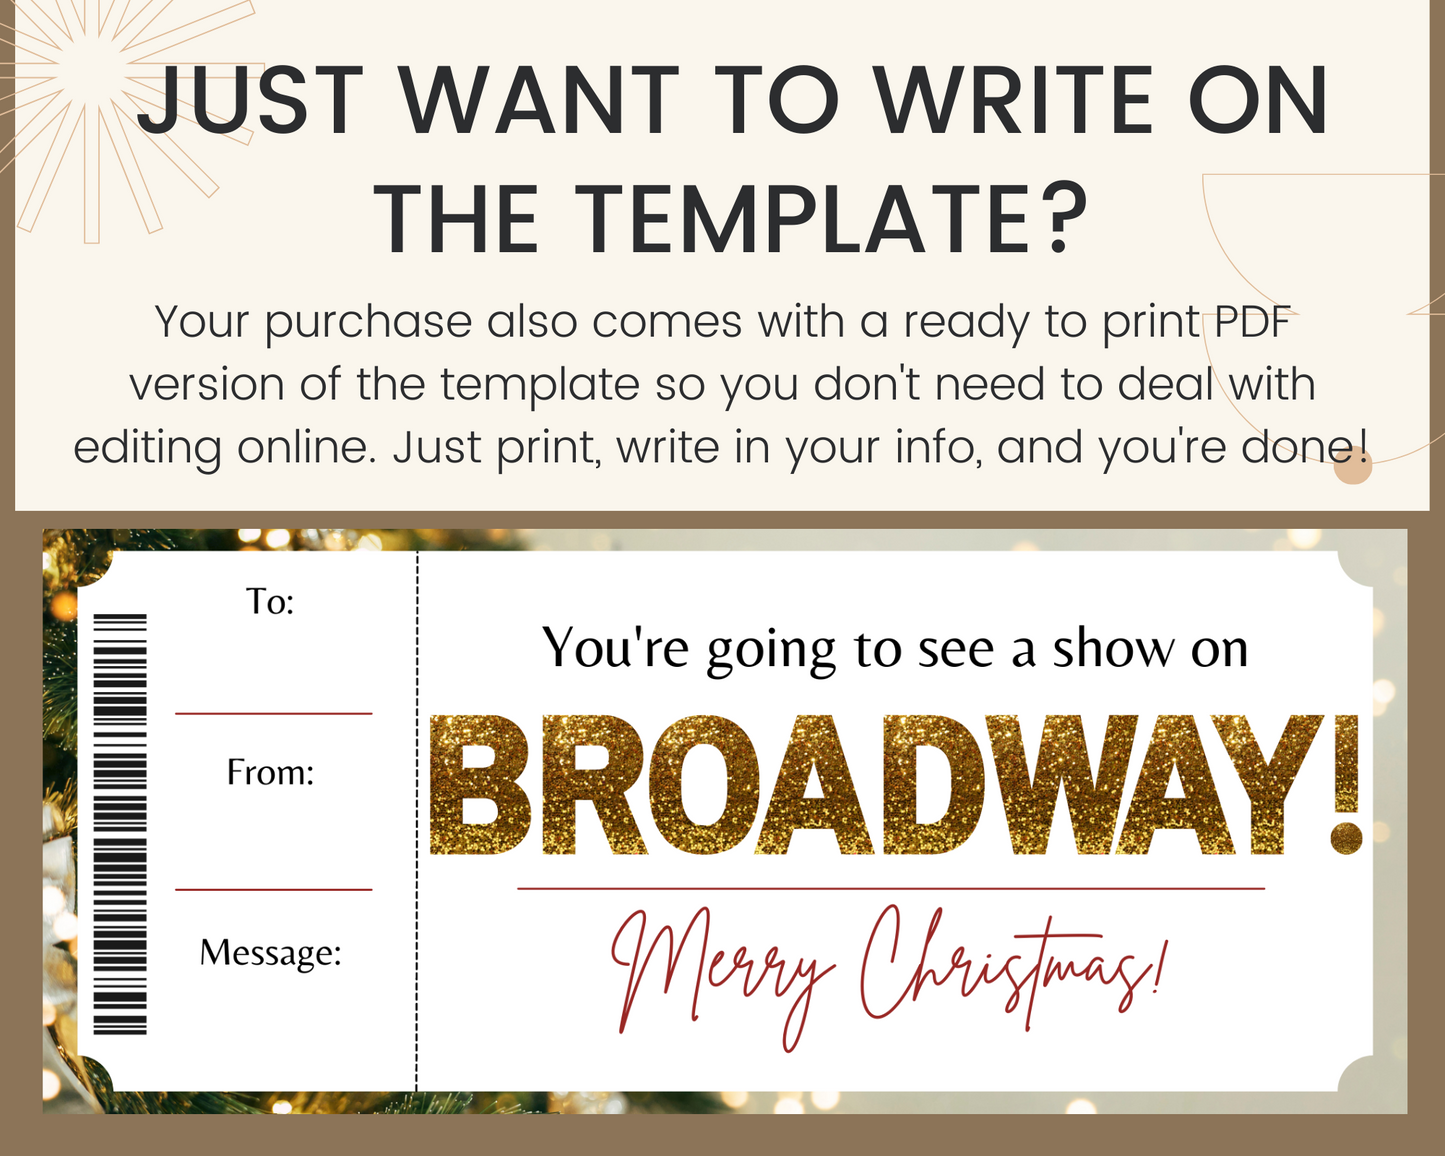 Merry Christmas Broadway Show Gift Certificate Template